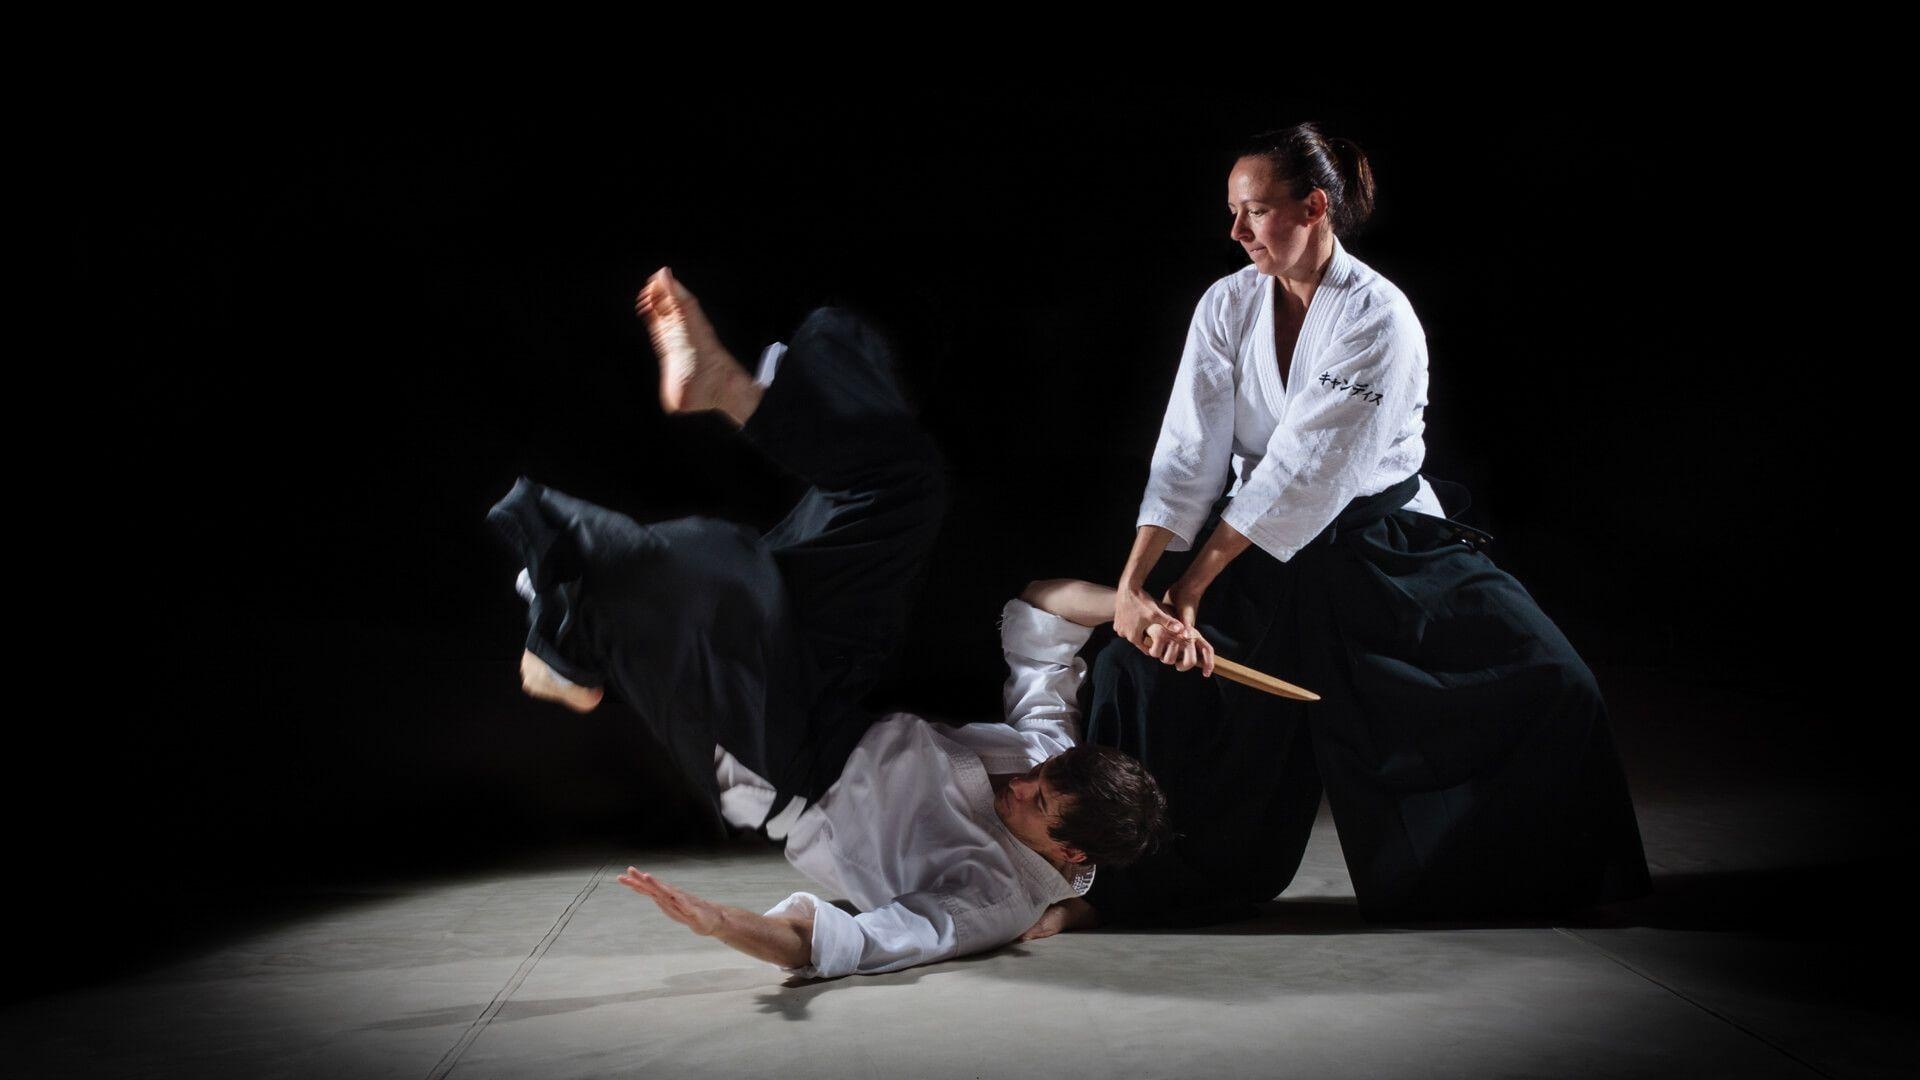 Aikido: Slanted breath throw technique performed by a tori to disarm uke, Martial arts. 1920x1080 Full HD Wallpaper.